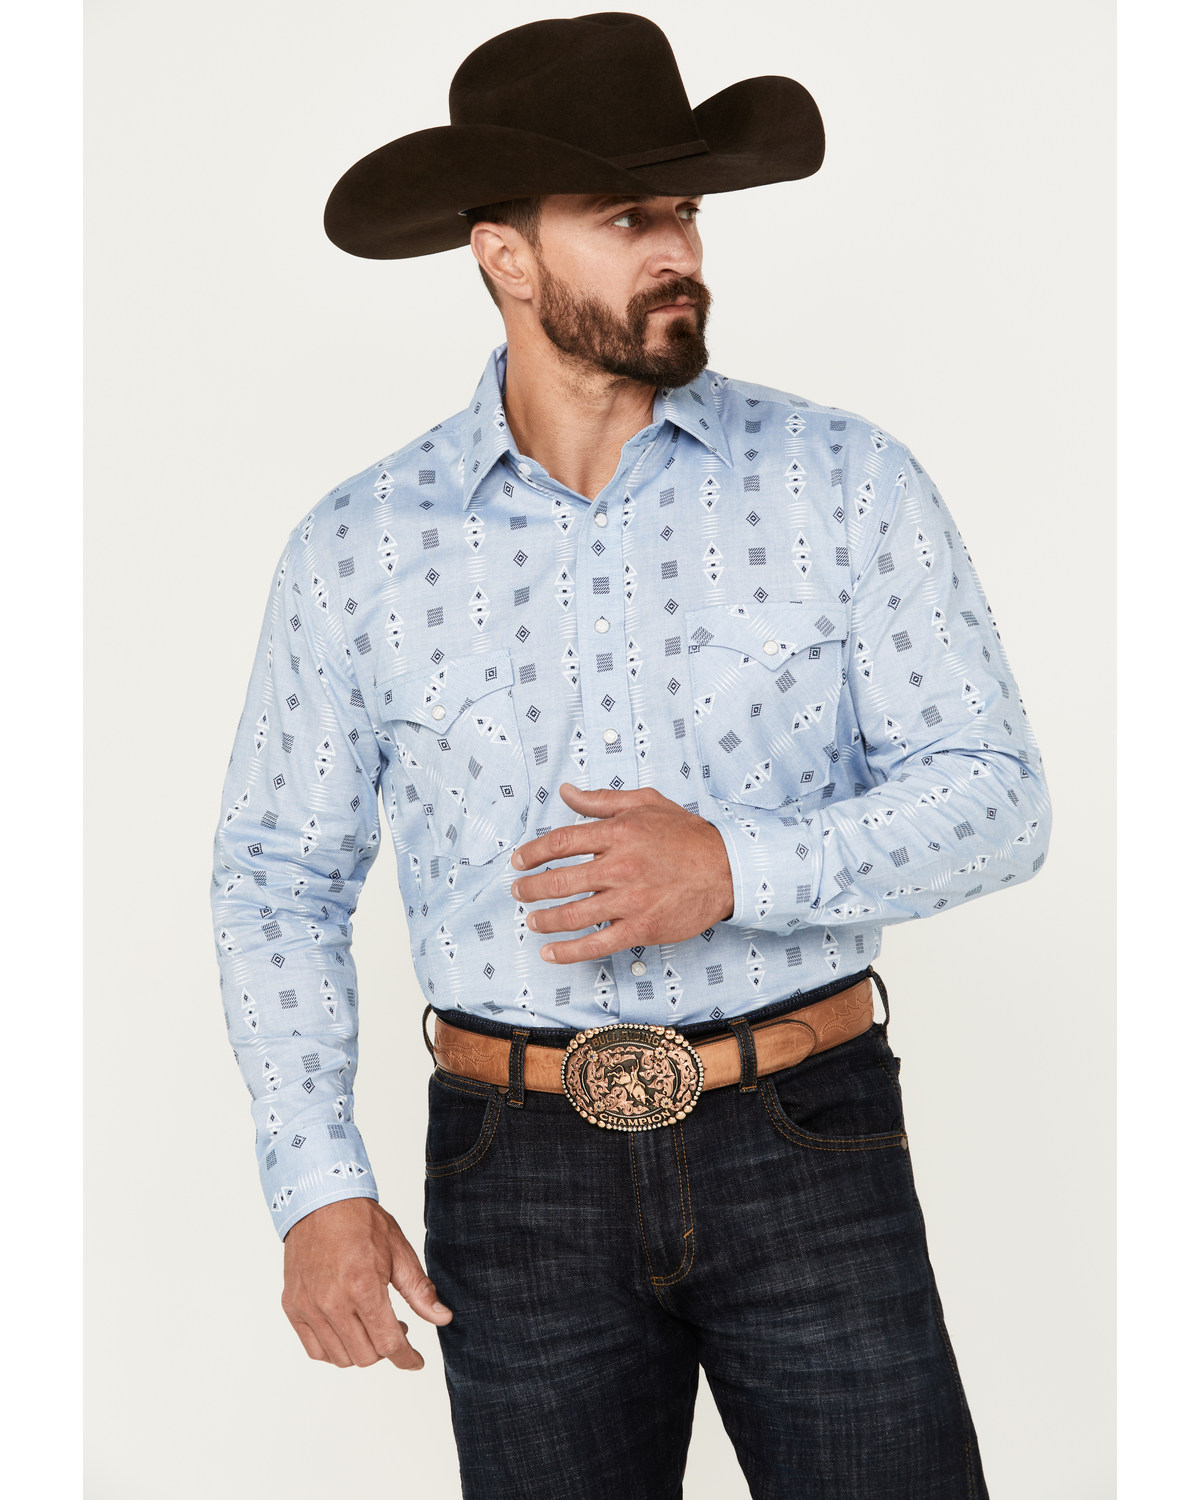 Rough Stock by Panhandle Men's Chambray Southwestern Print Long Sleeve Snap Western Shirt